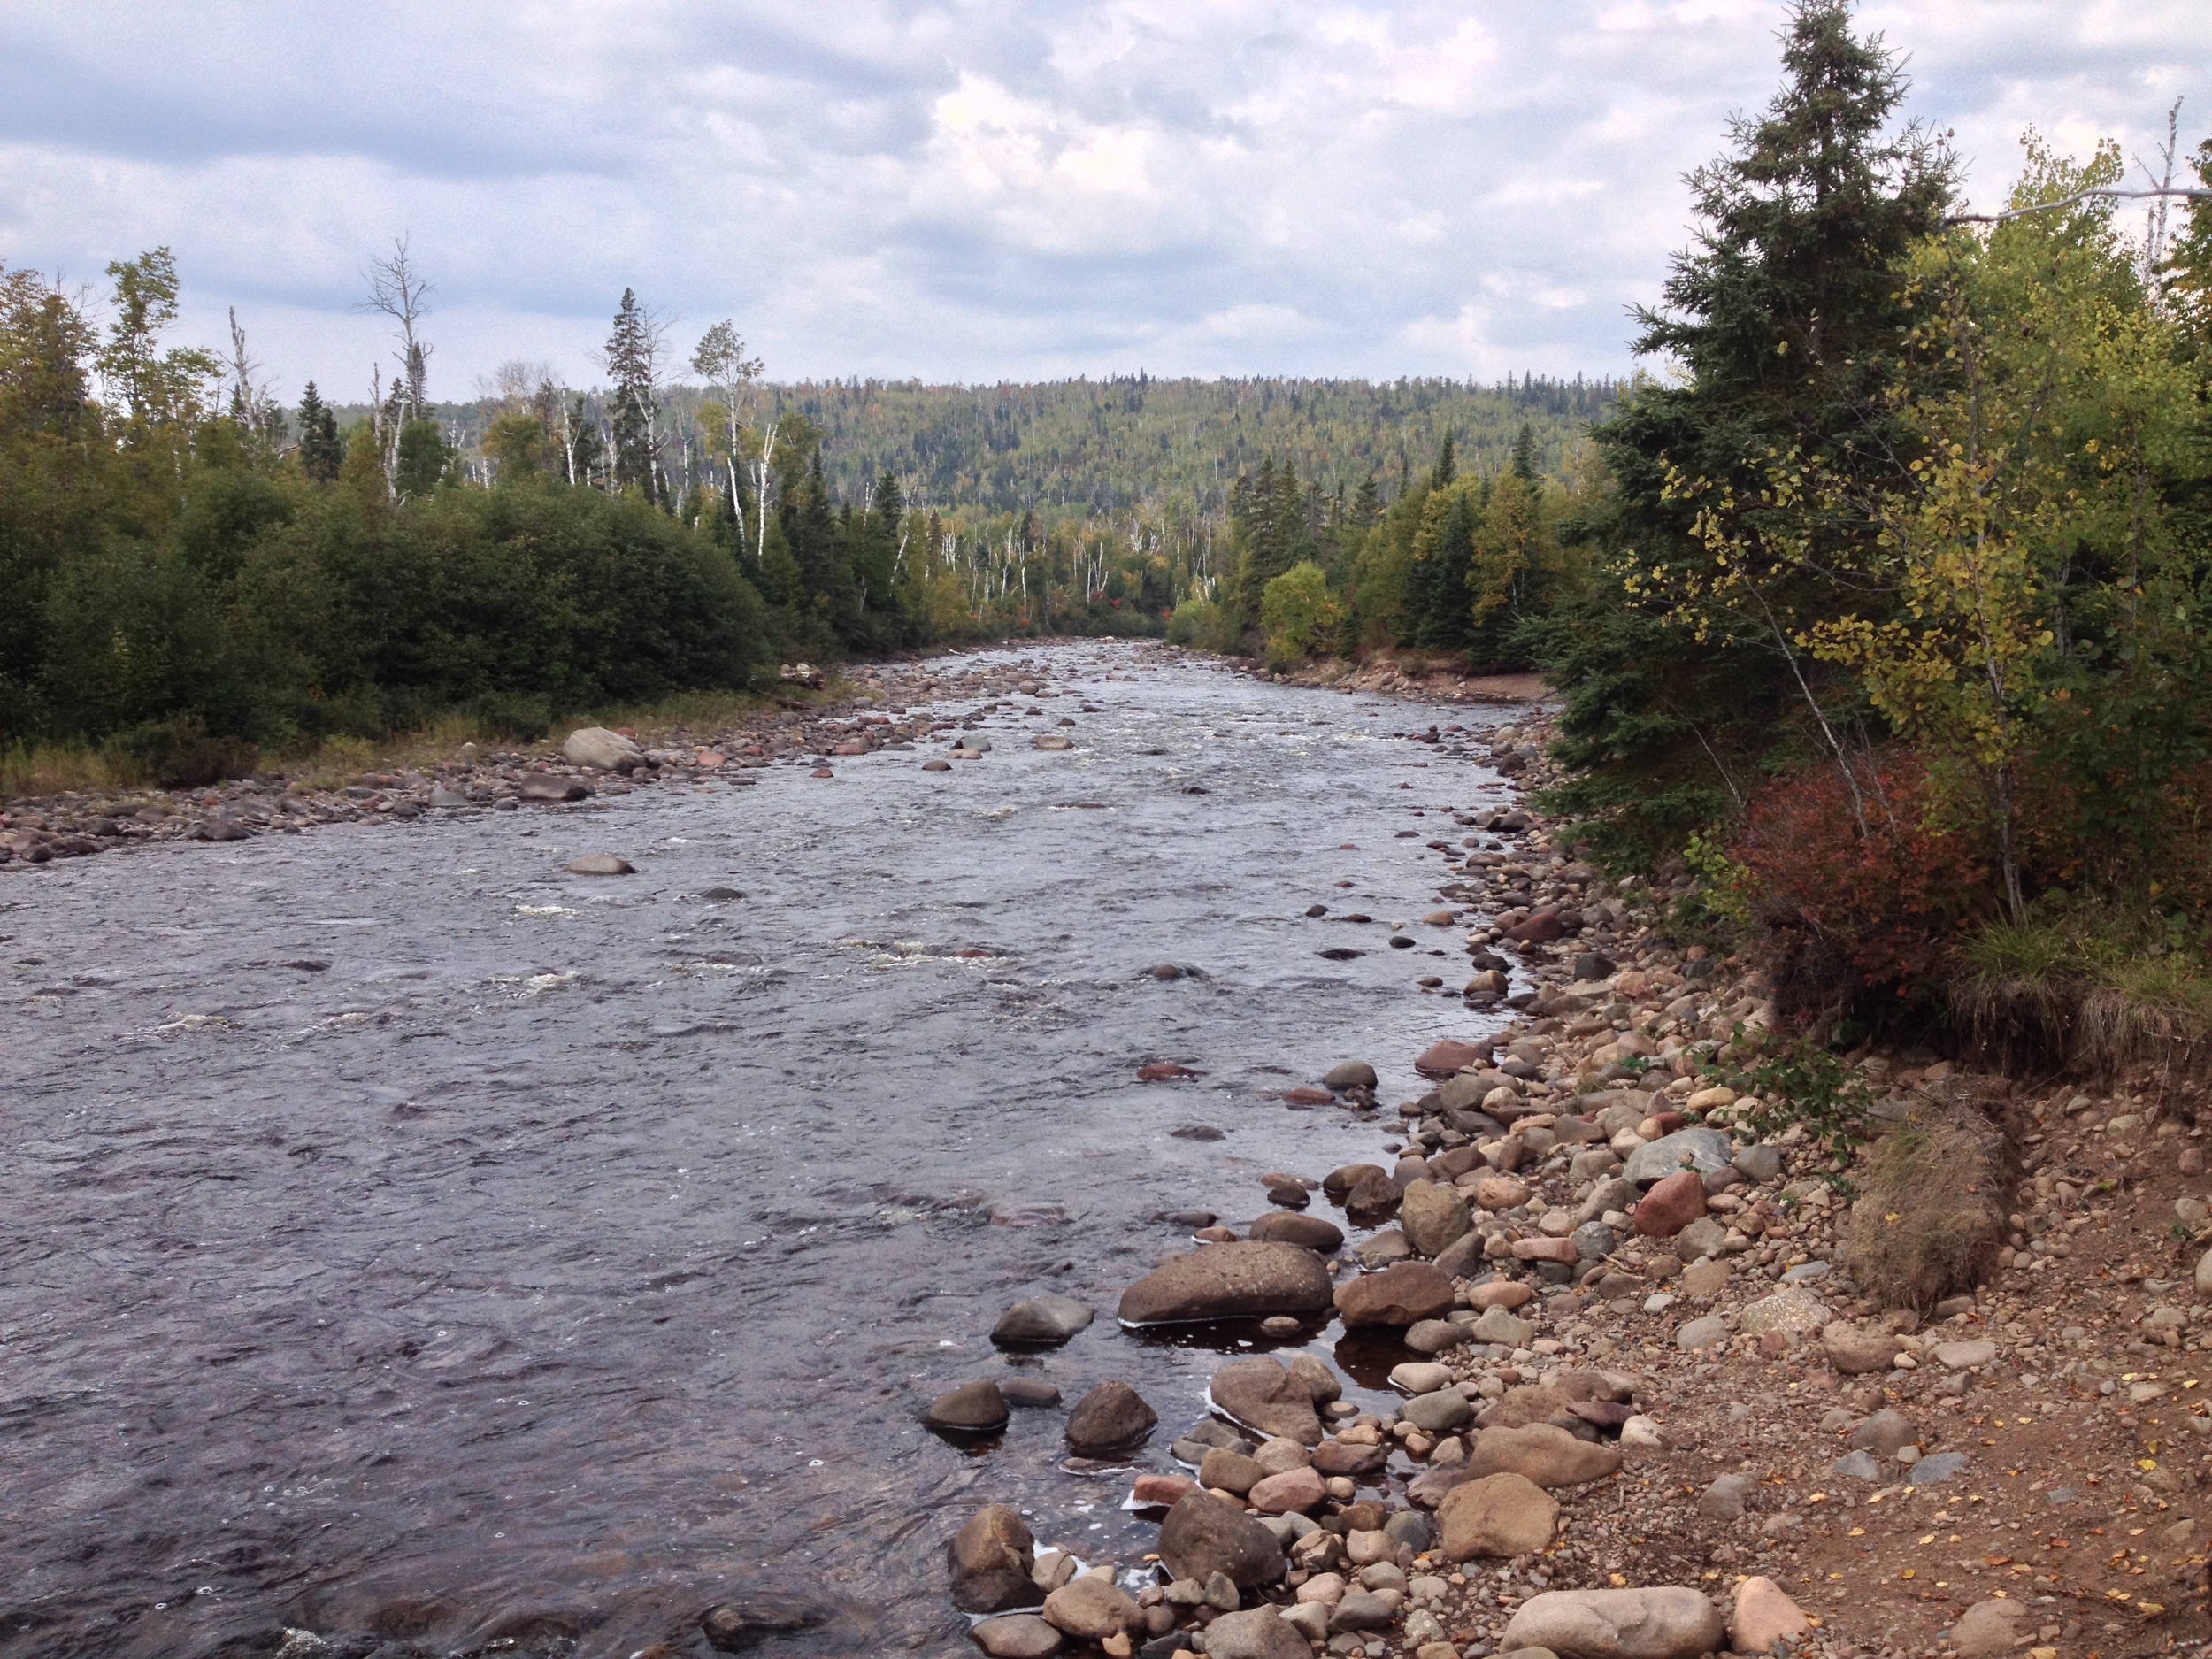 Following the Temperance River